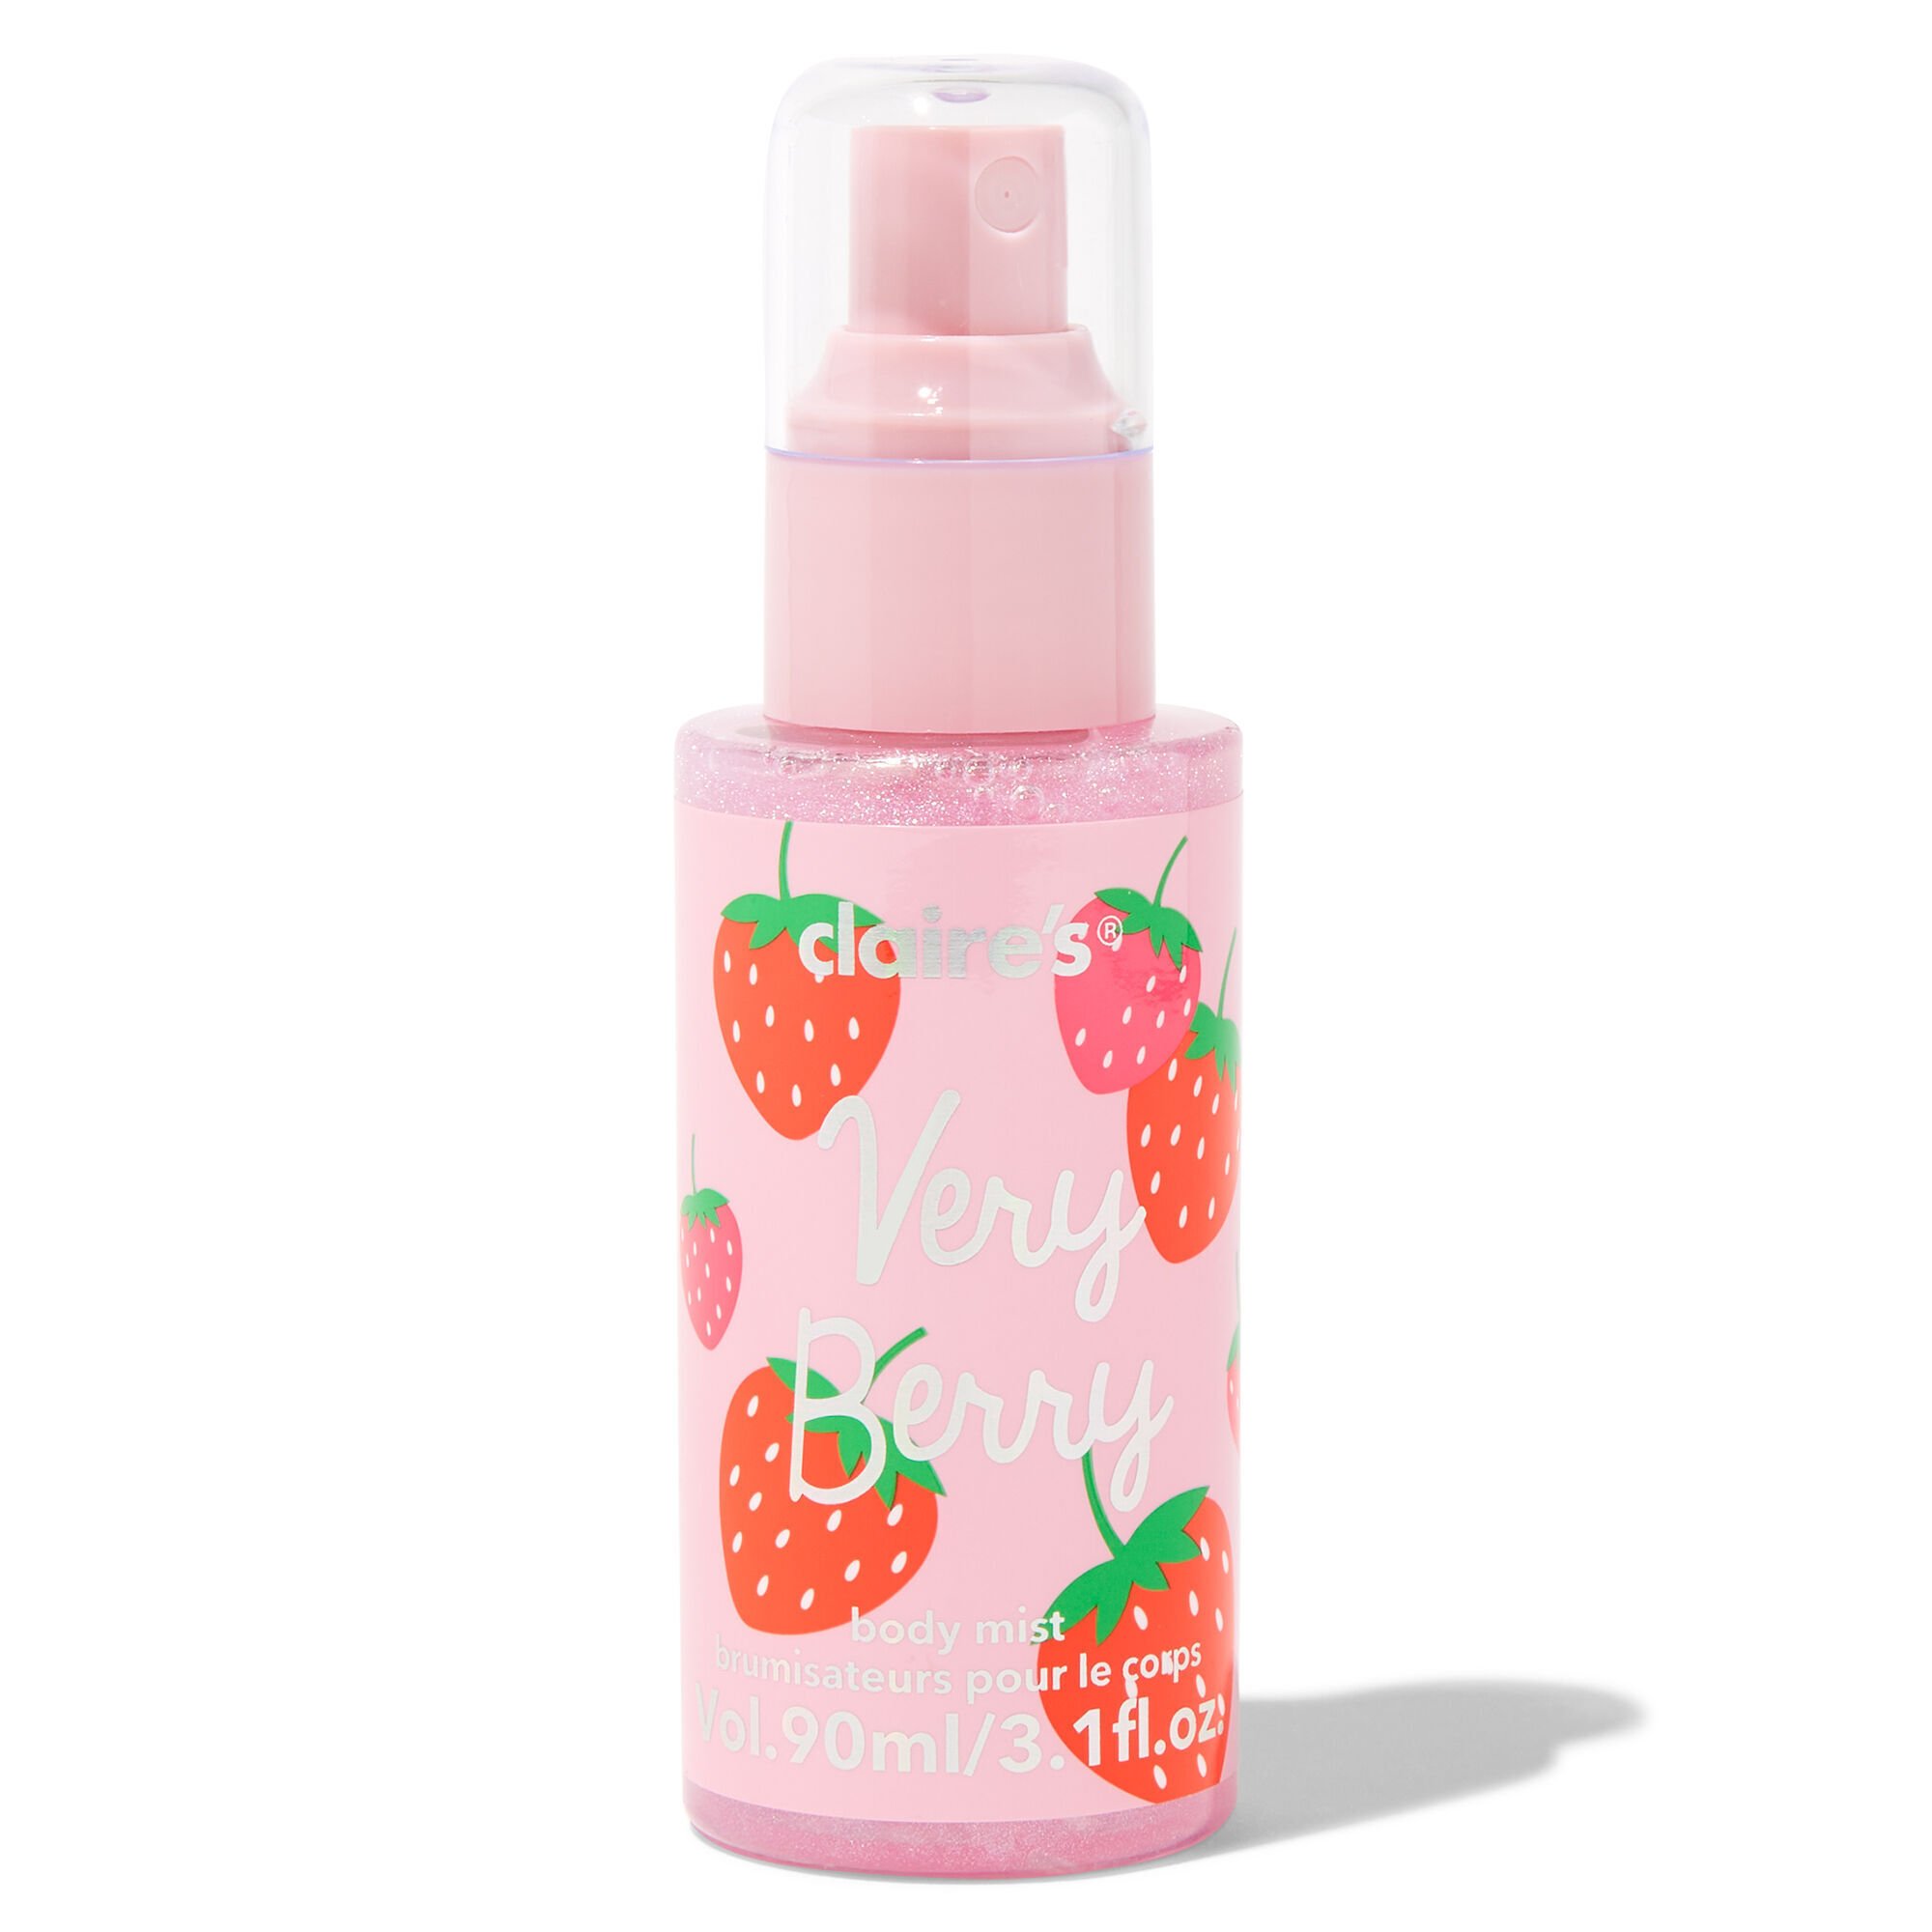 View Claires Very Berry Glitter Body Mist information